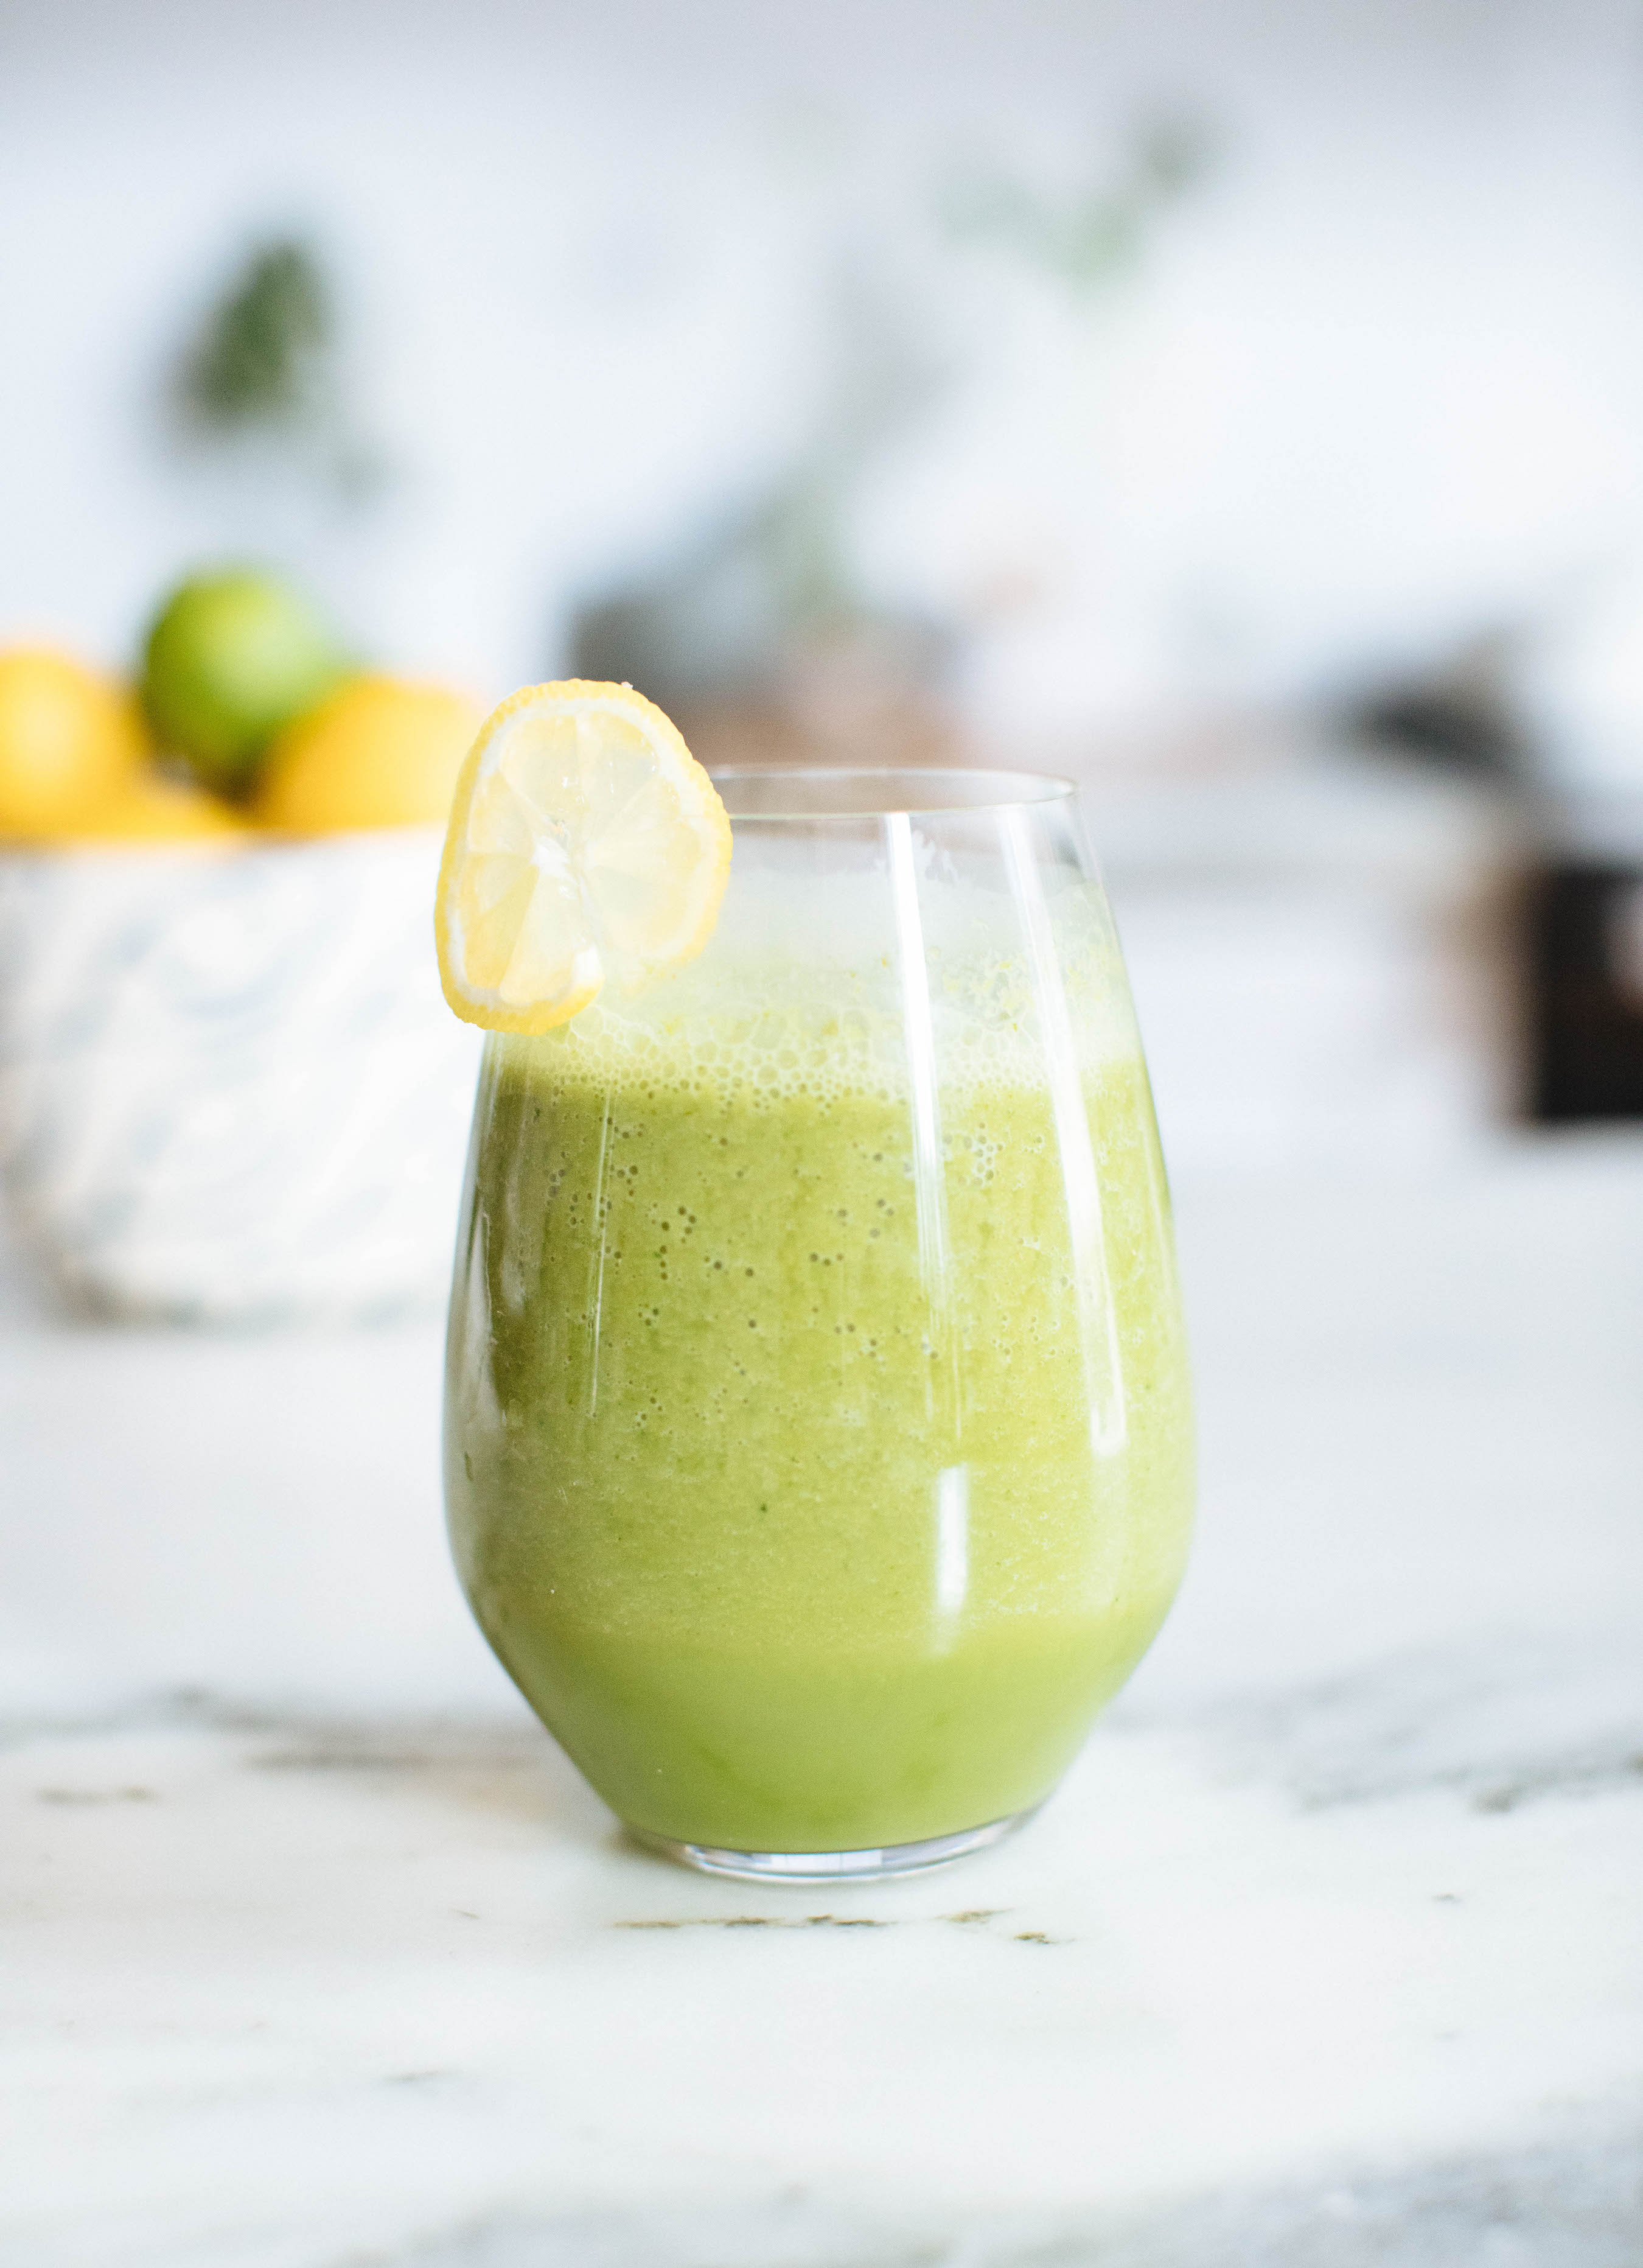 Green Tart Smoothie | Nutrition Stripped